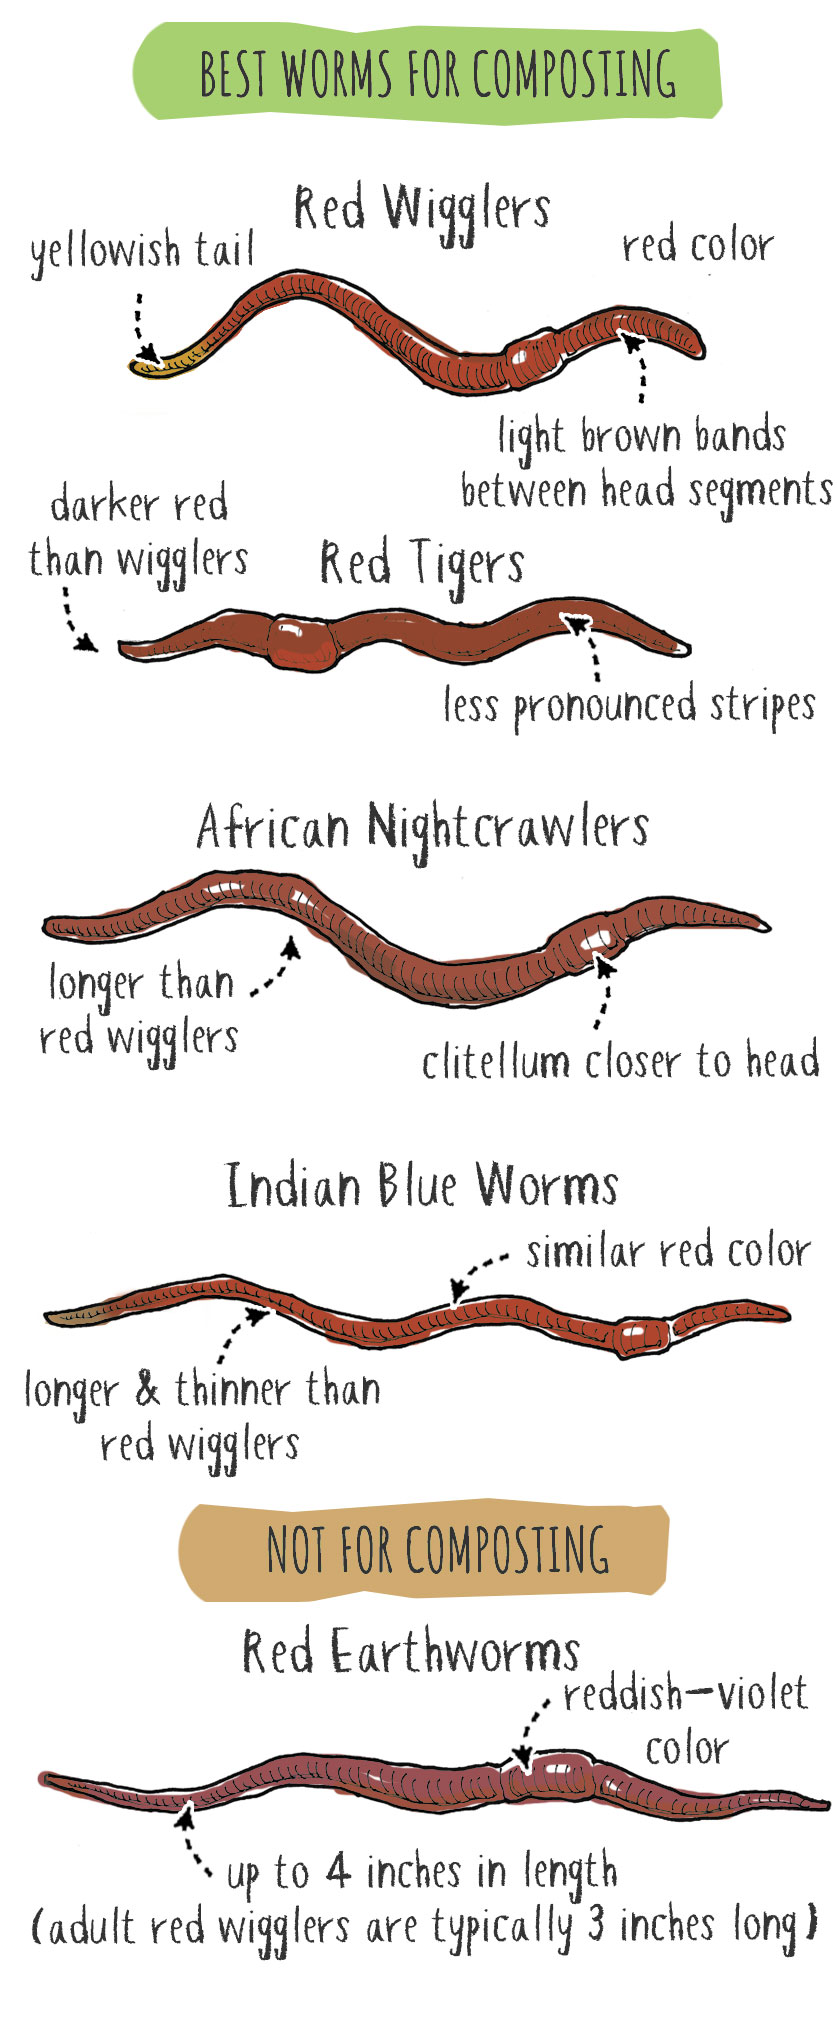 what type of worm is best for compost